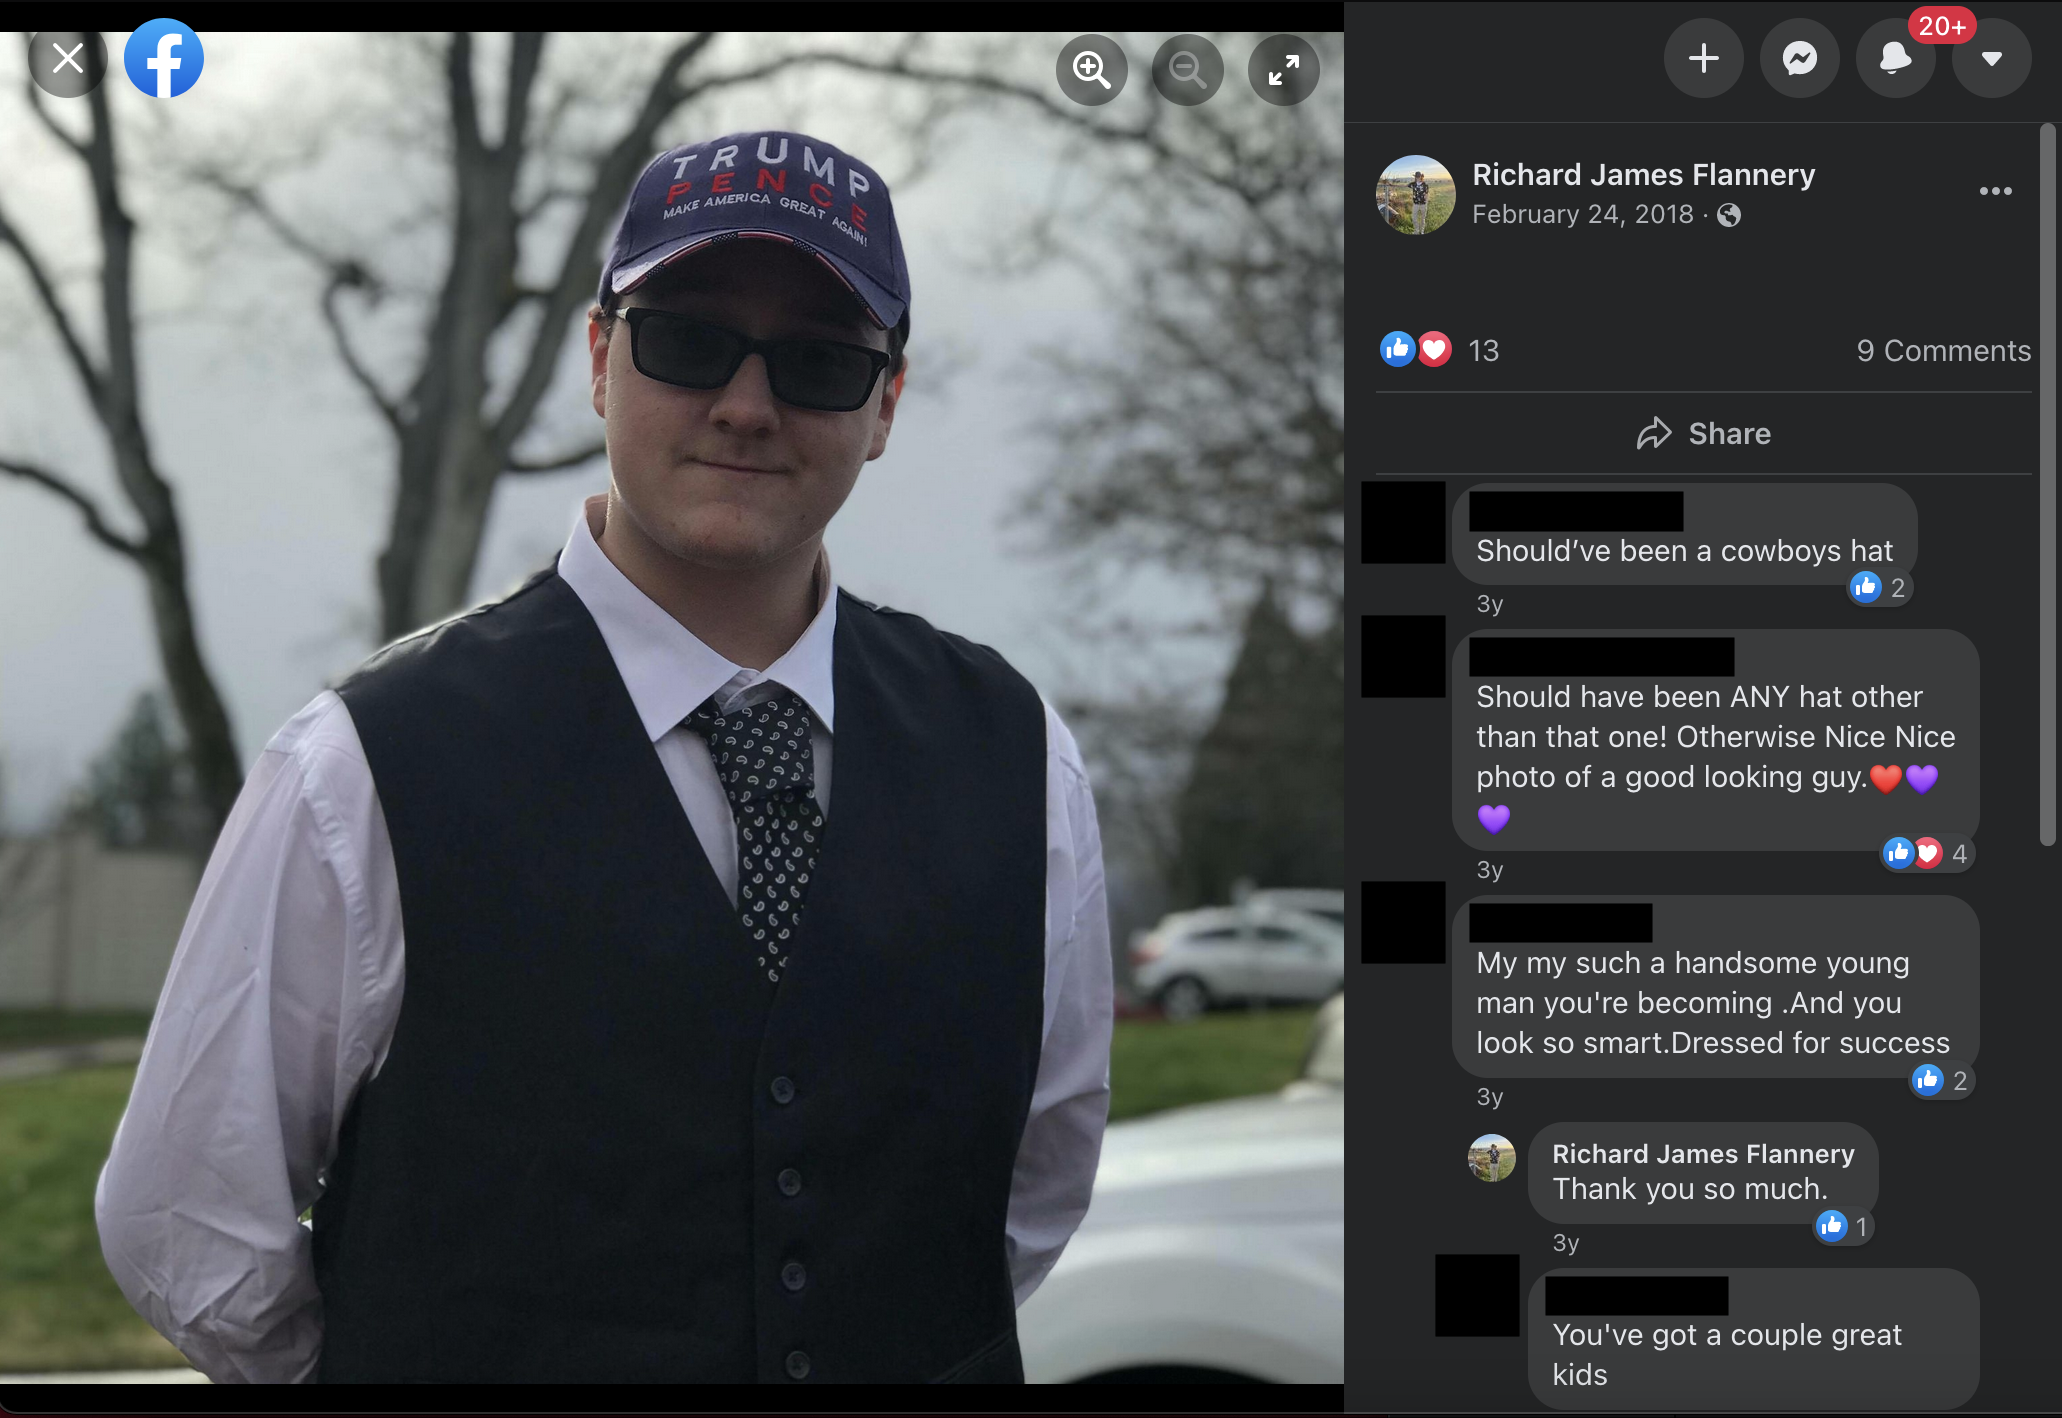 Richard James Flannery posts a photo of himself wearing a Trump supporter hat in 2018